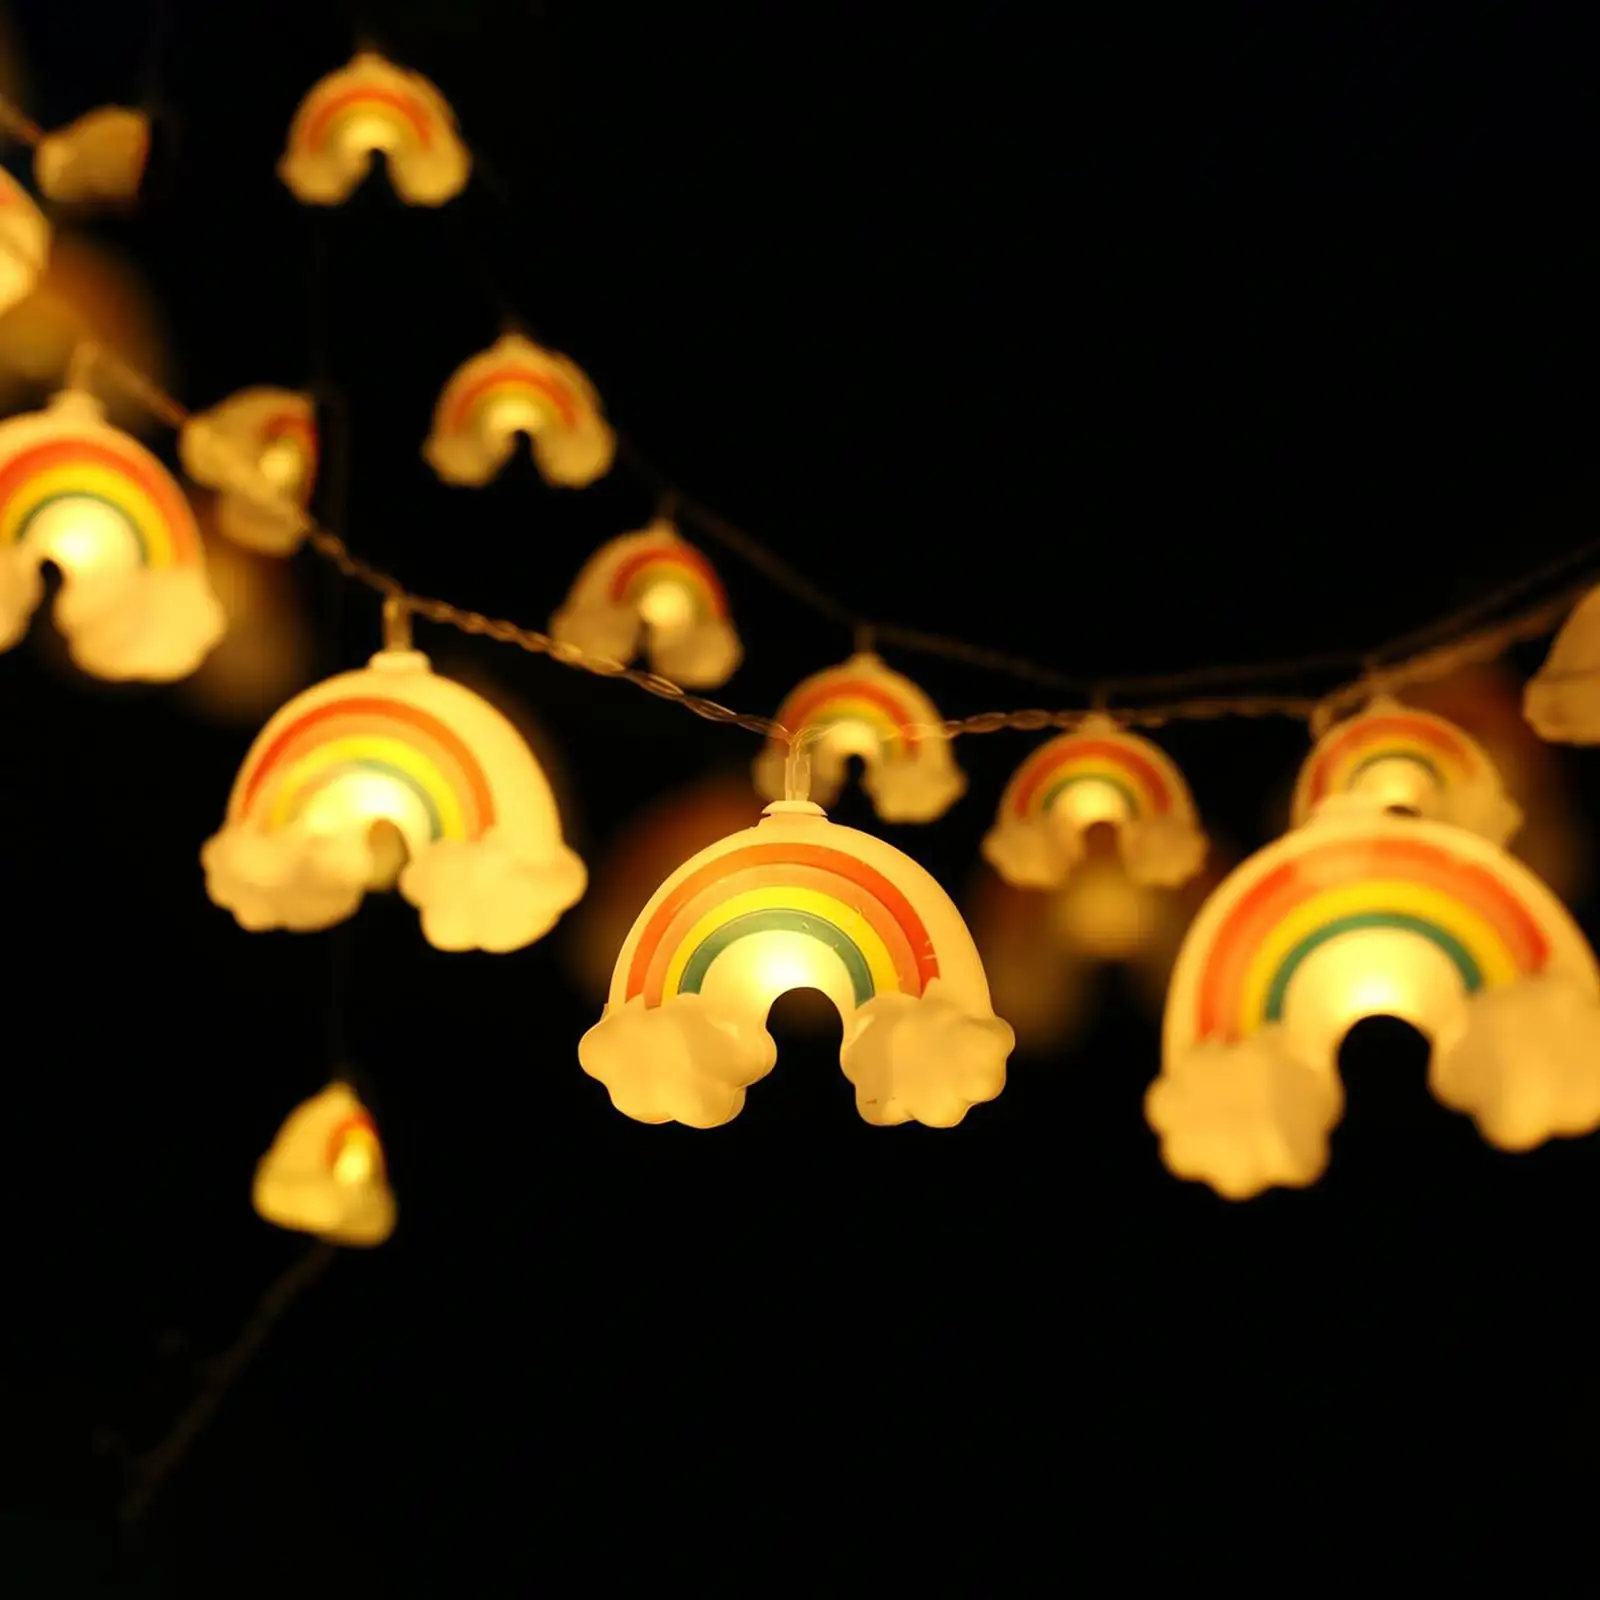 Rainbow String Lights Fairy Lights Decorative Contain 20 Lights Lamp for Outdoor Pathway Summer Beach Camping Wedding Decor